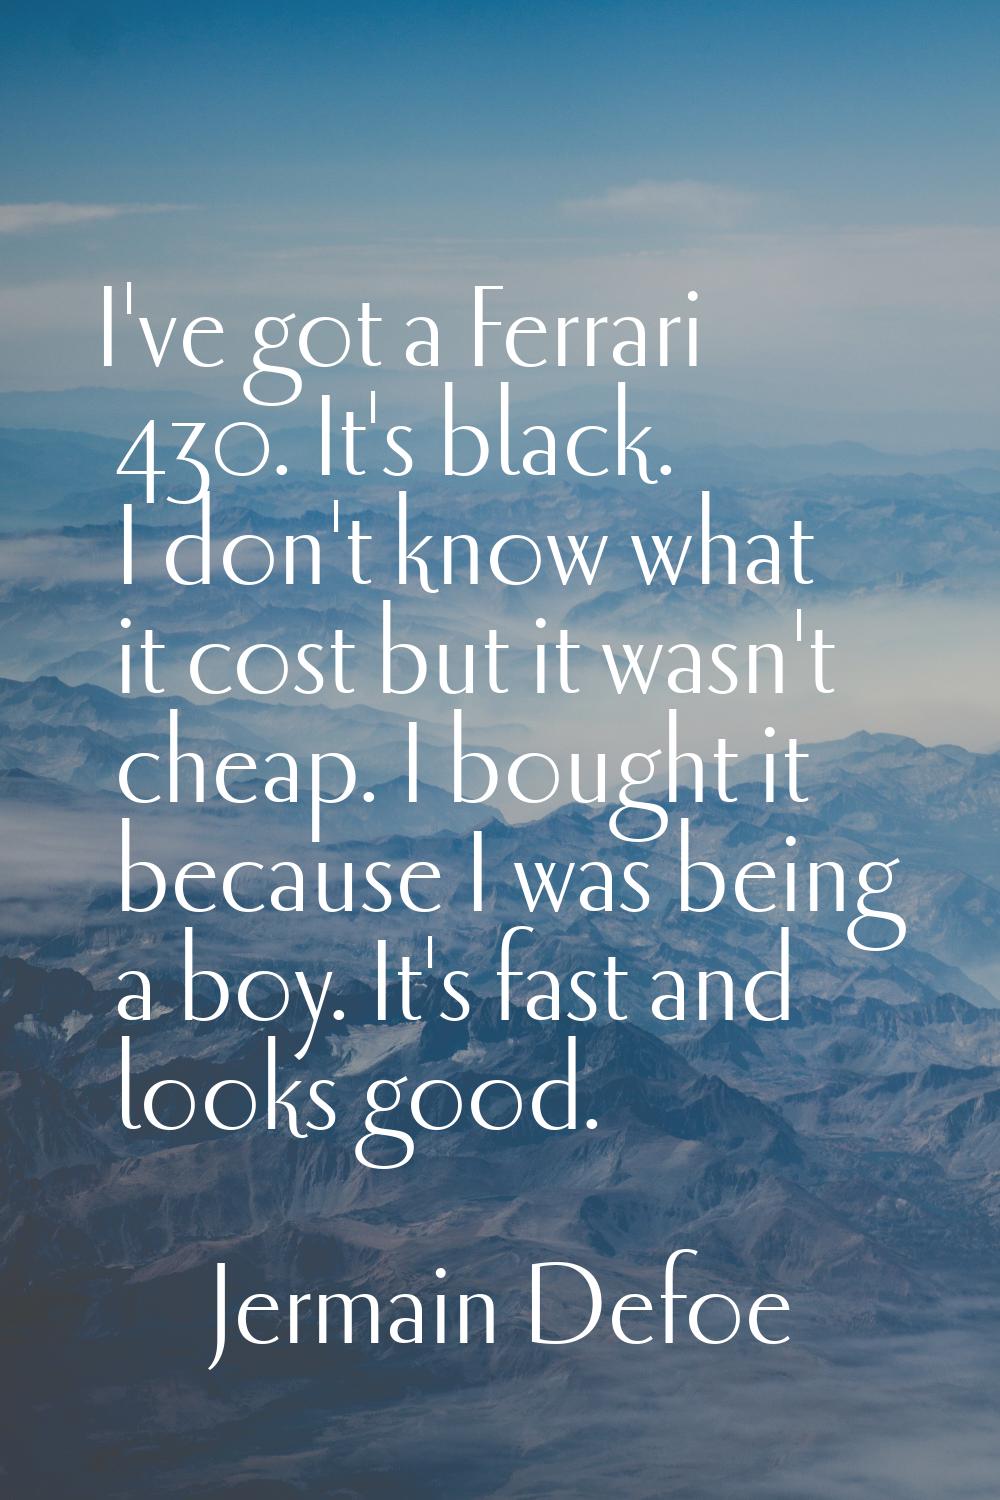 I've got a Ferrari 430. It's black. I don't know what it cost but it wasn't cheap. I bought it beca